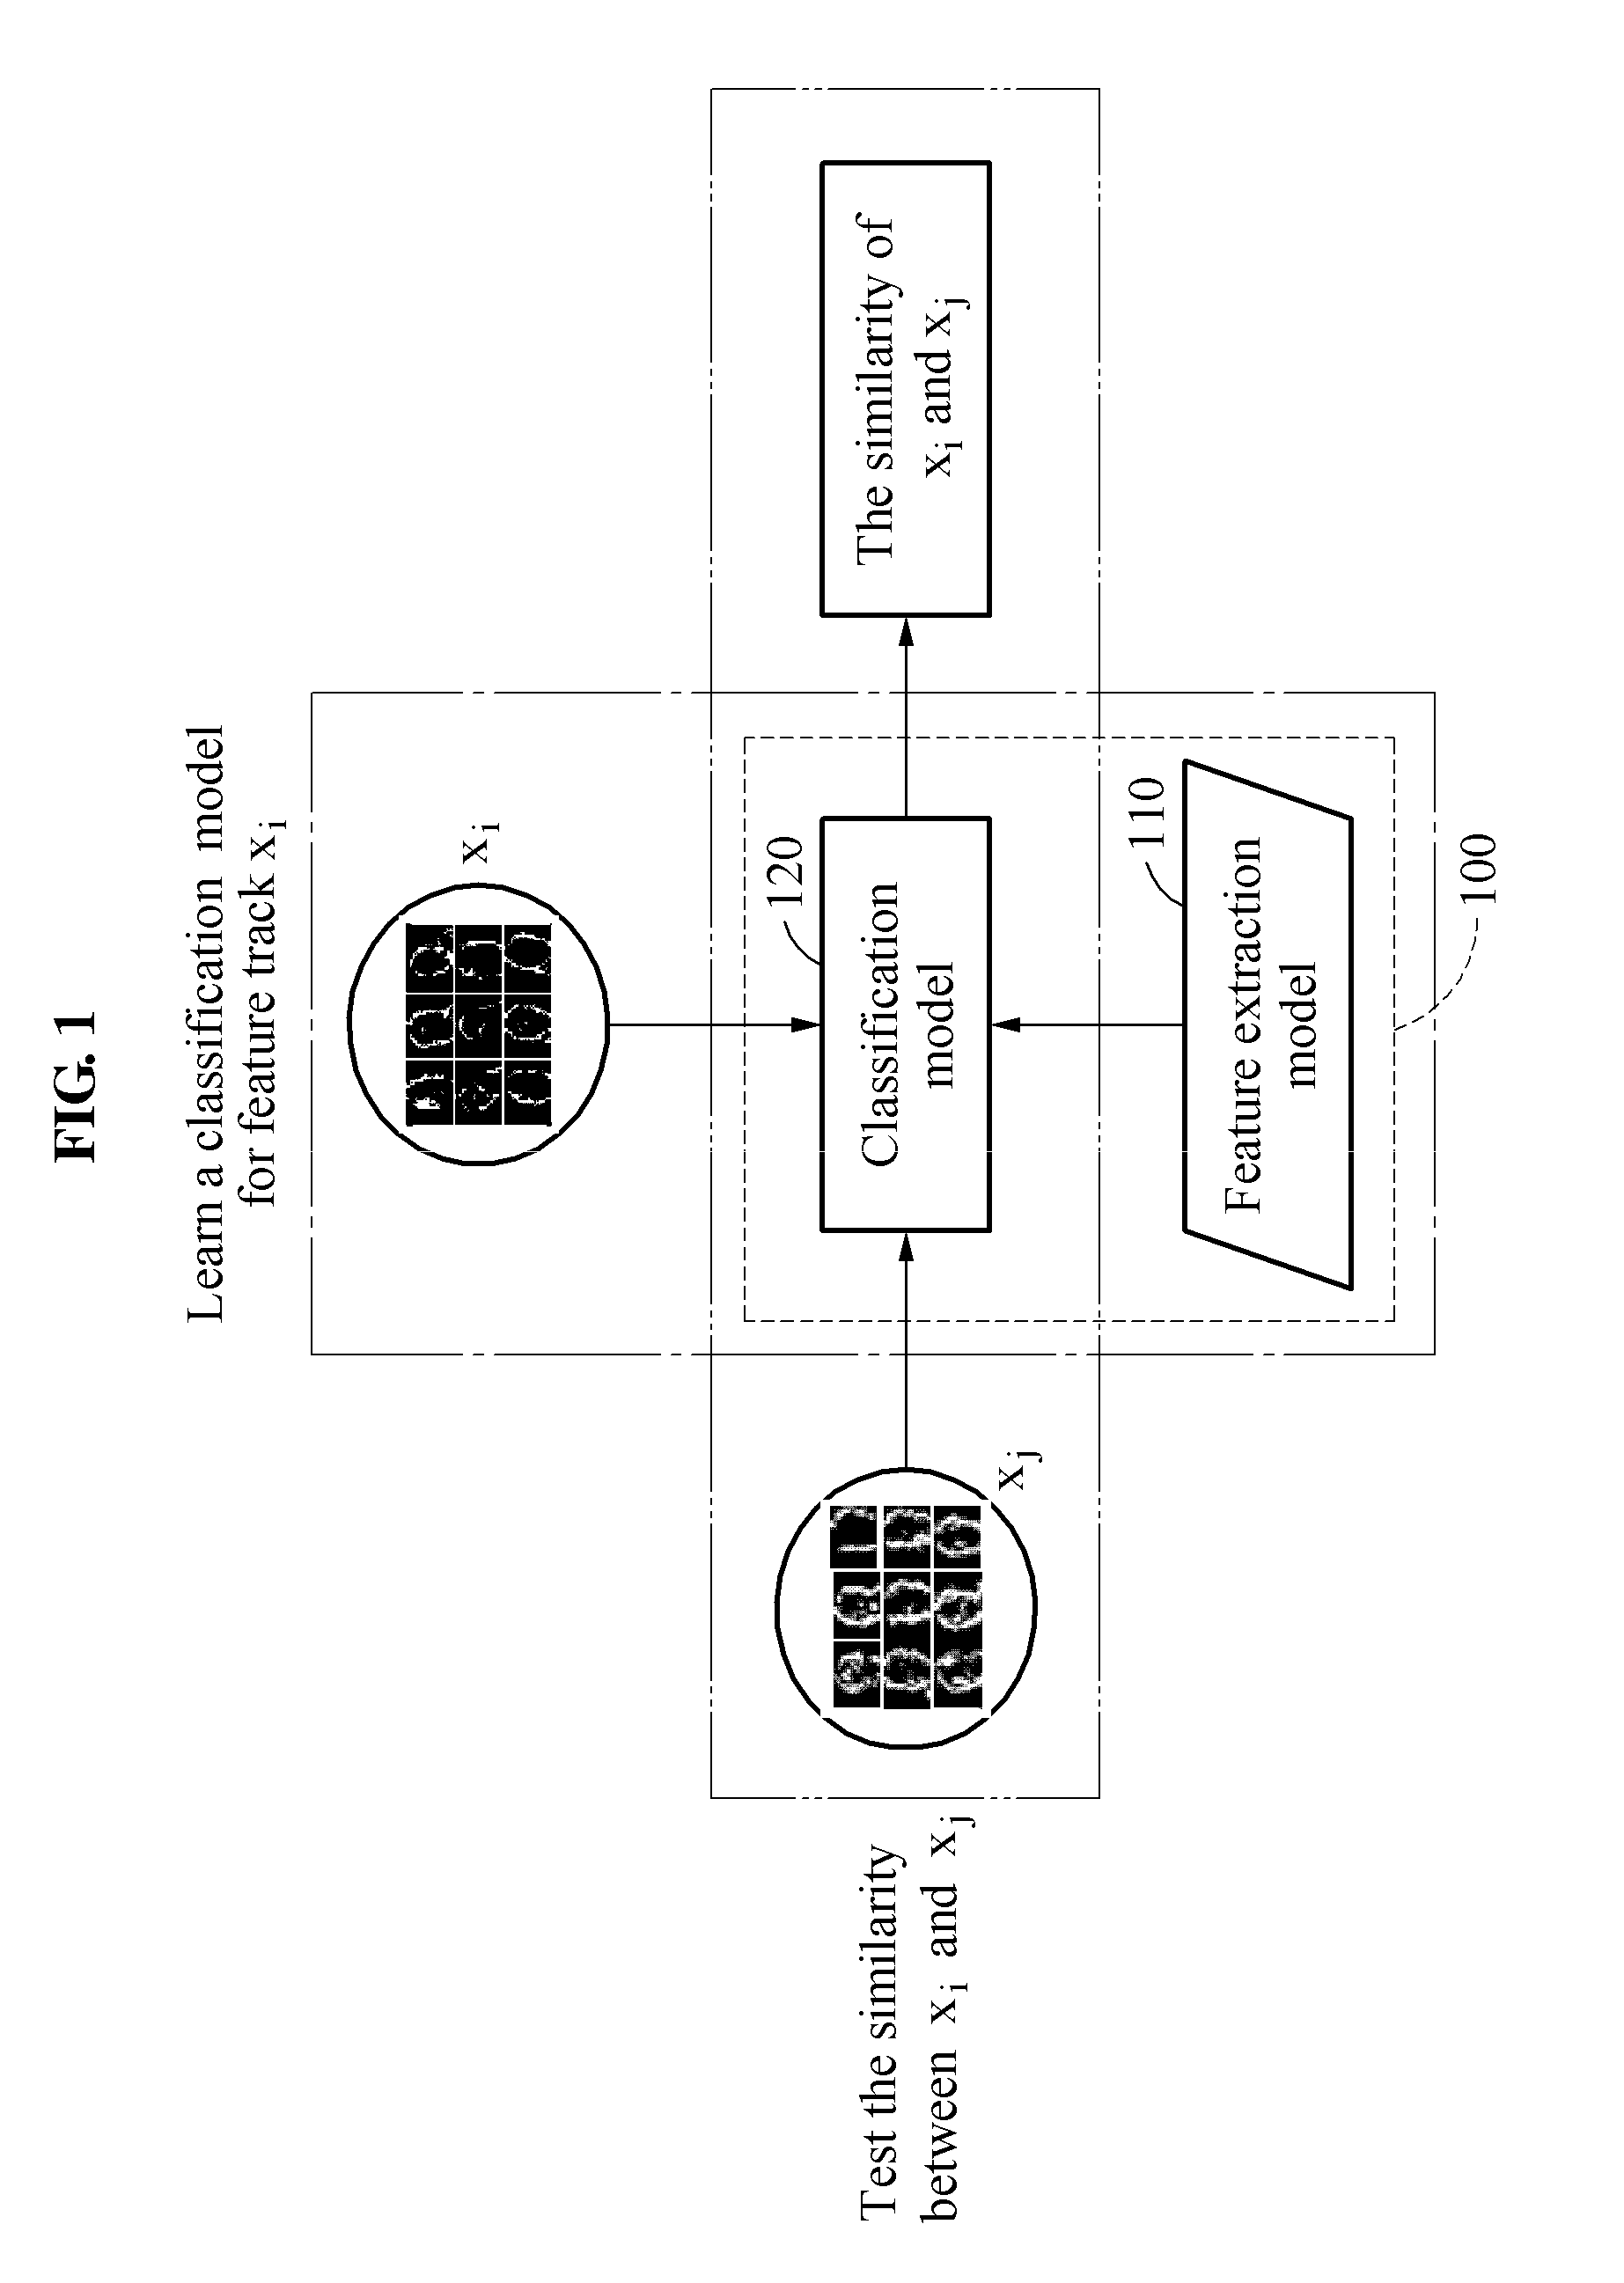 User management method and apparatus